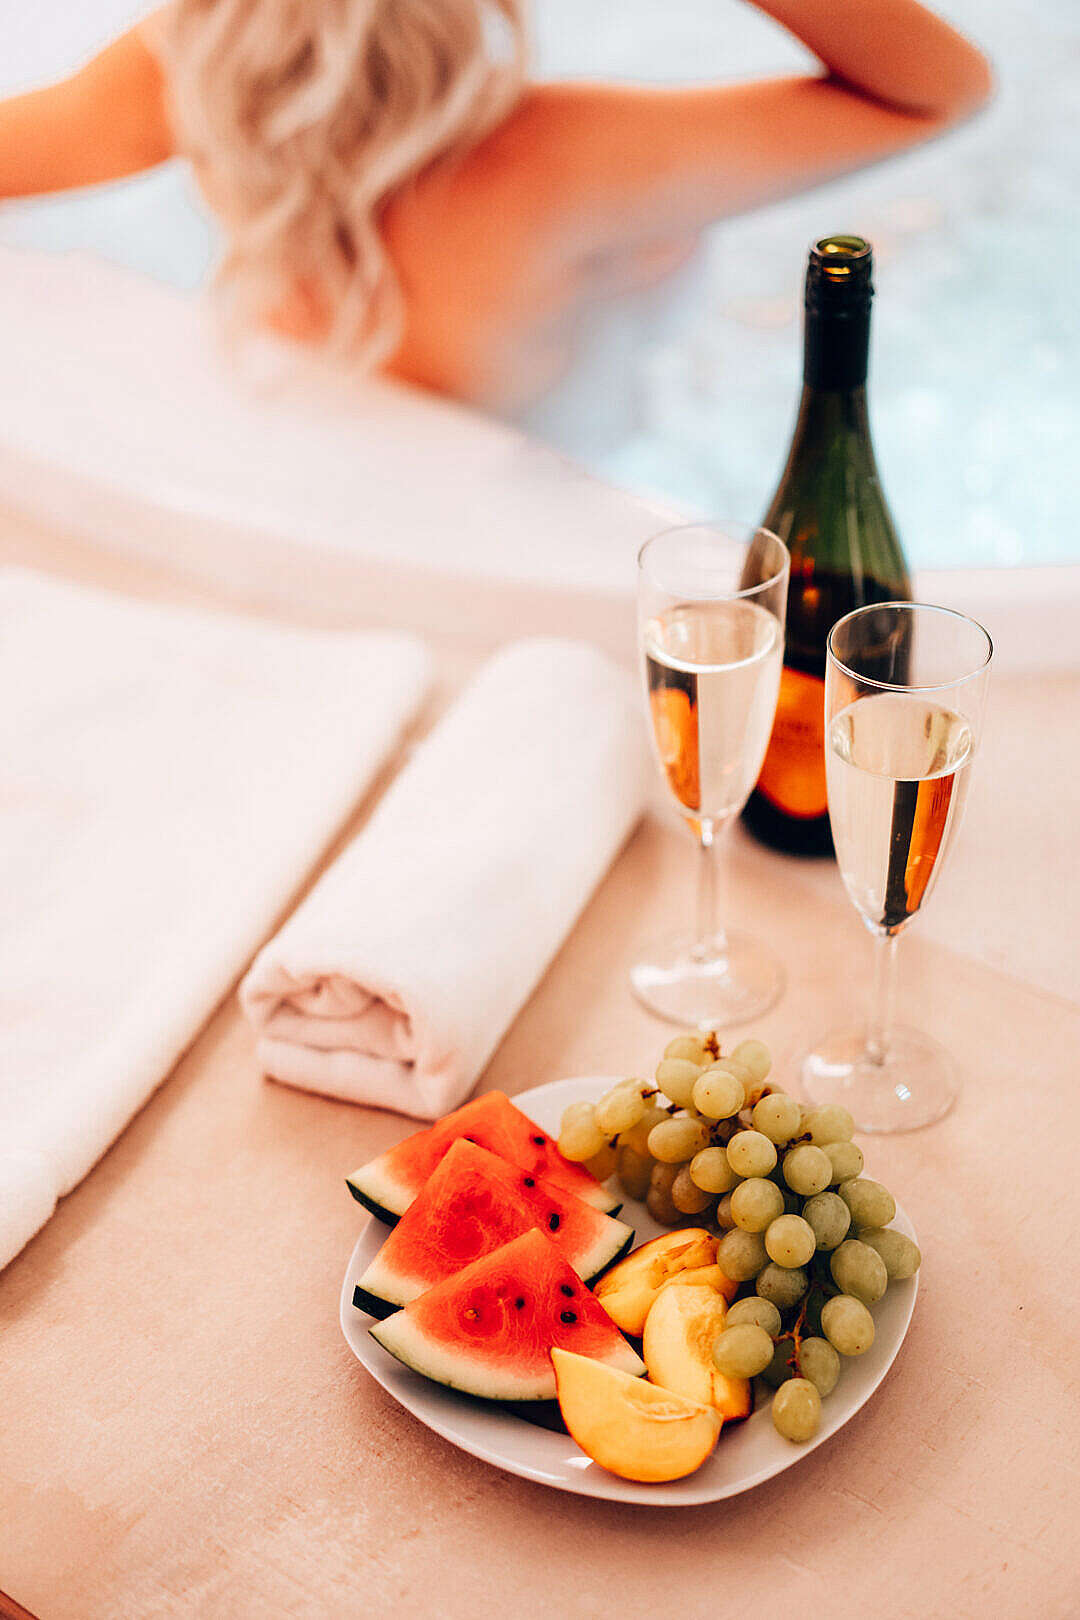 Prosecco and Fresh Fruits in a Private Spa